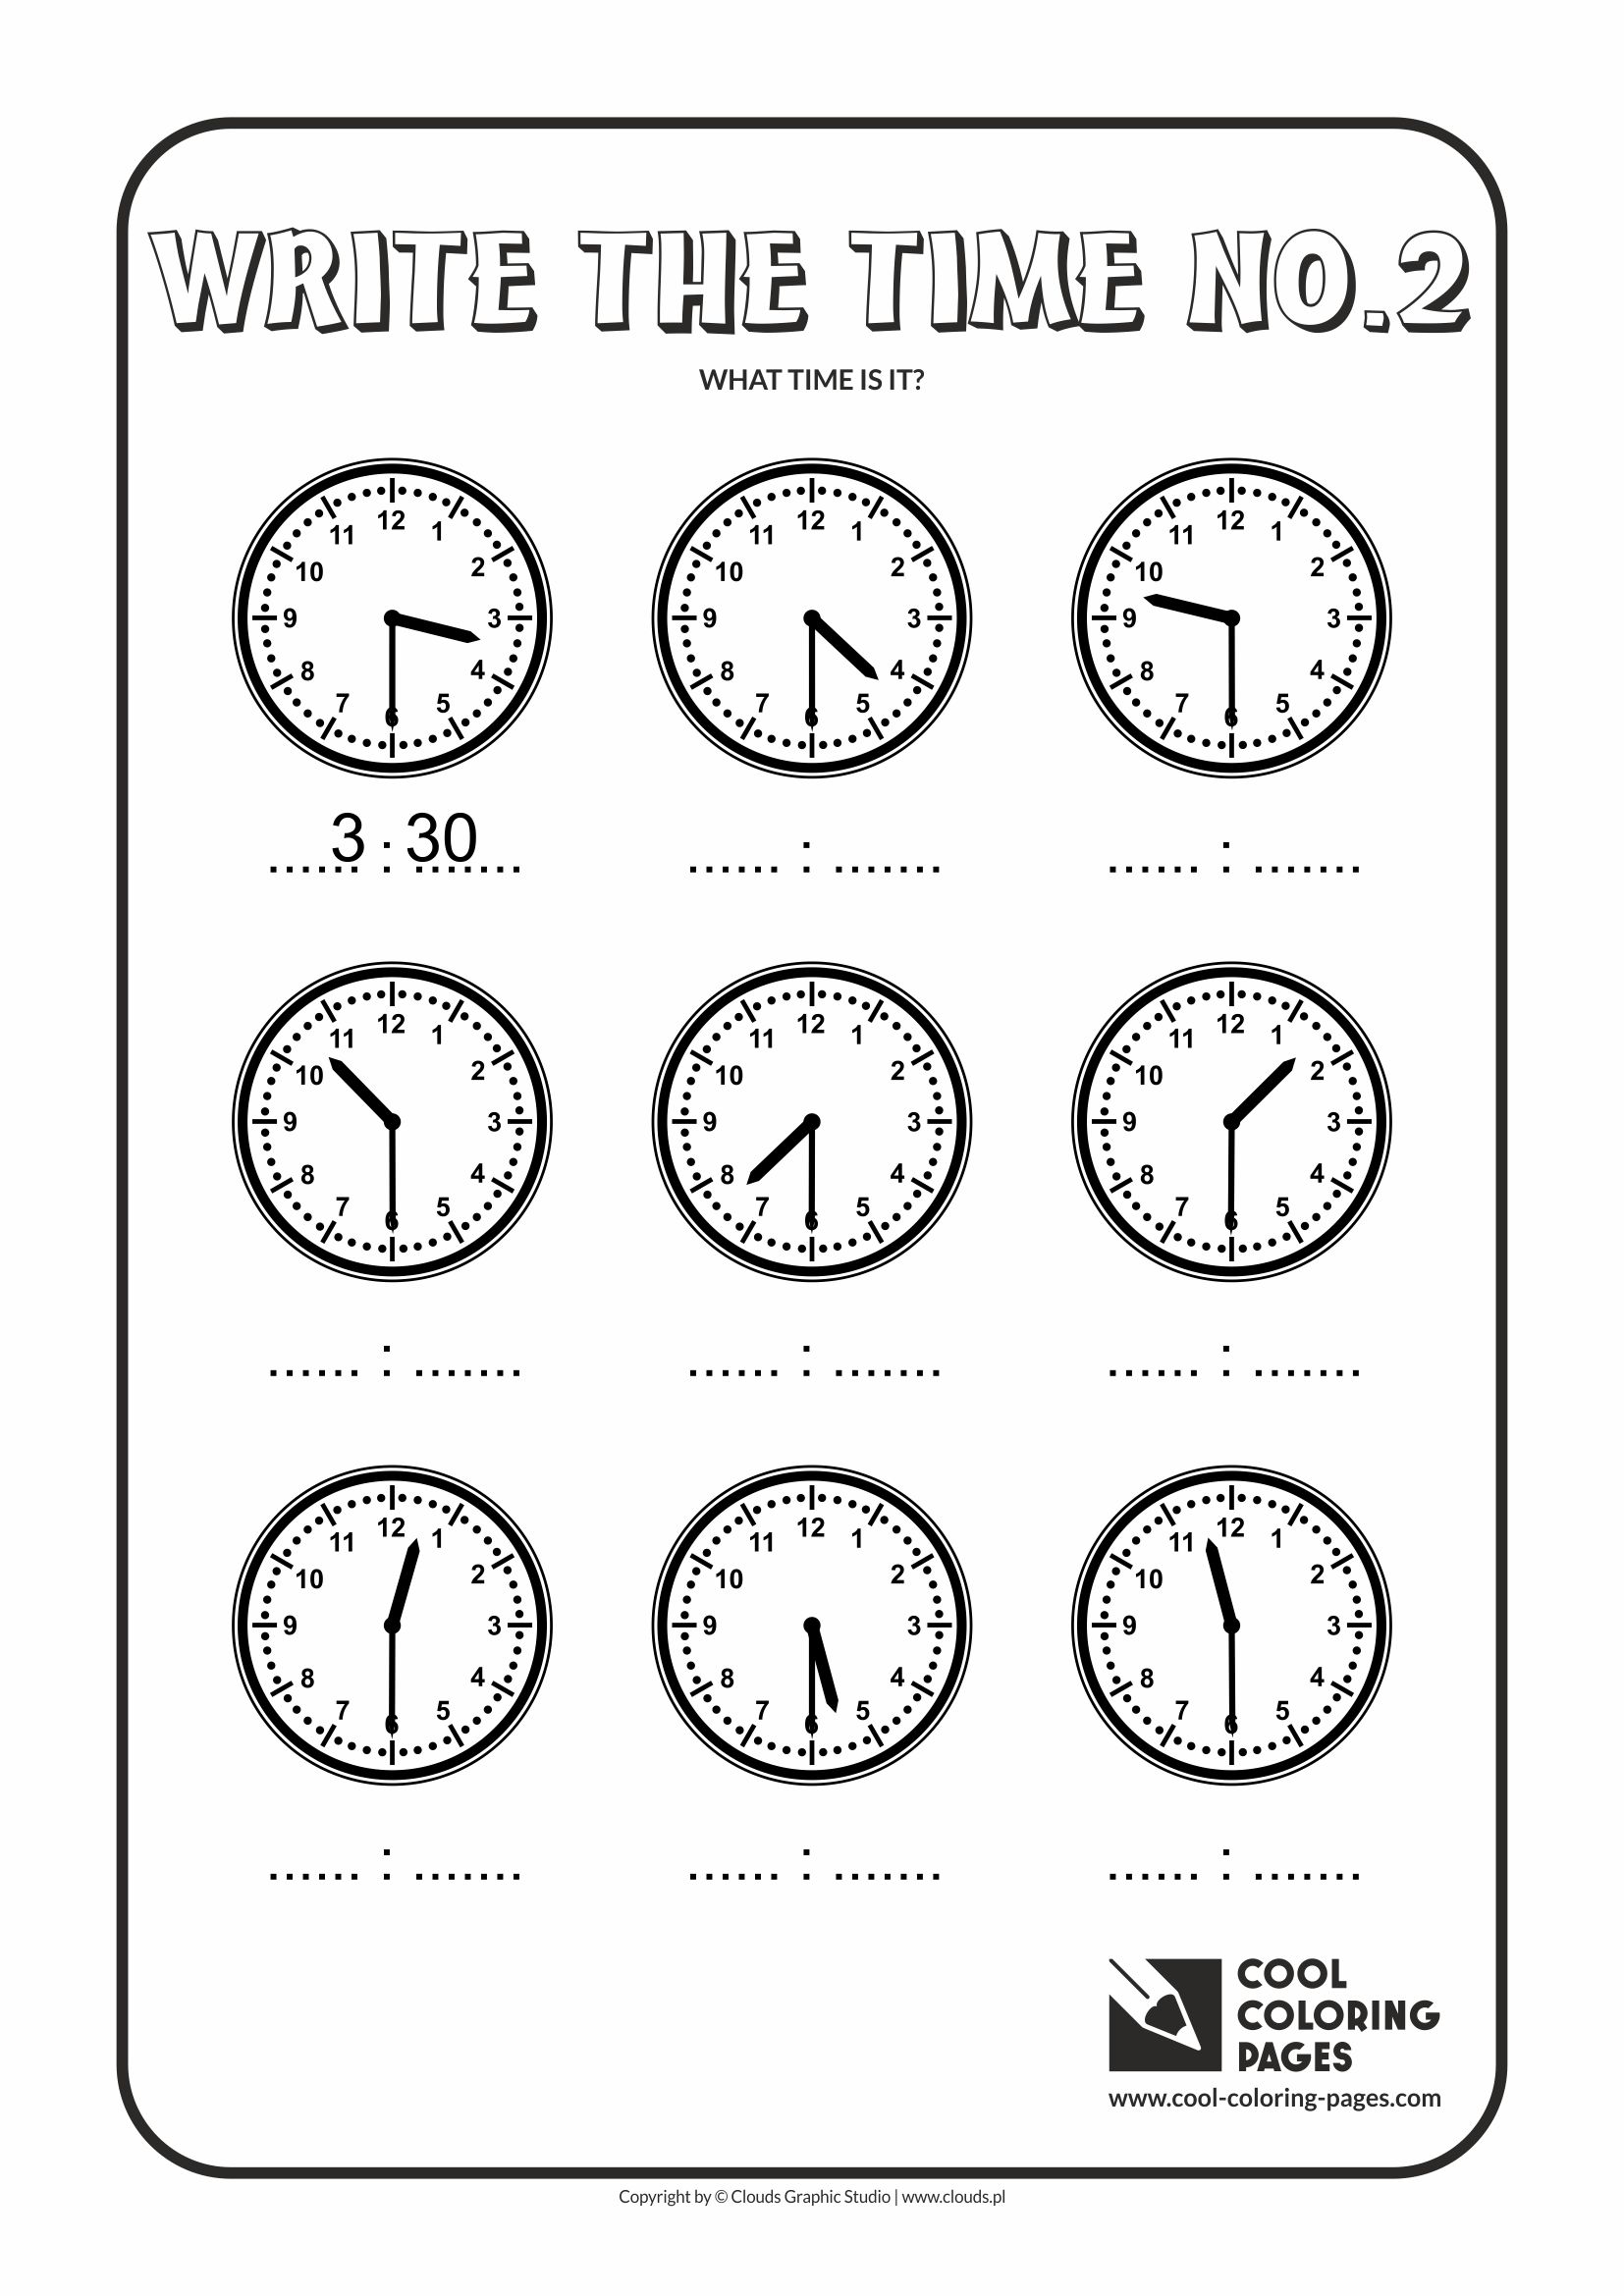 Cool Coloring Pages - Time / Write the time no.2